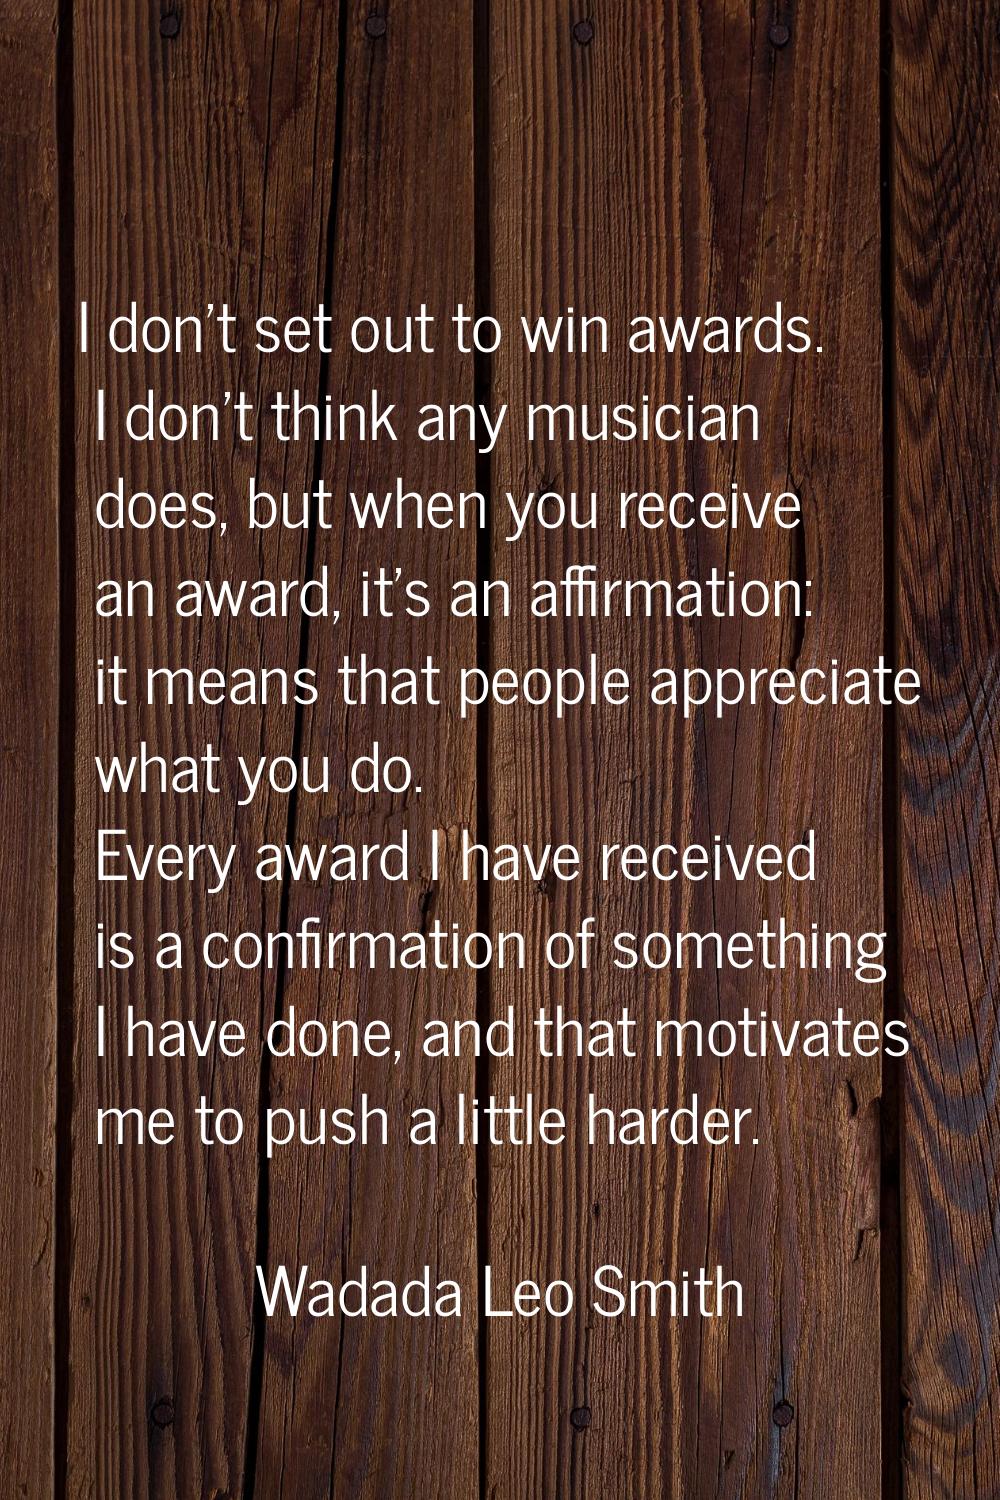 I don't set out to win awards. I don't think any musician does, but when you receive an award, it's